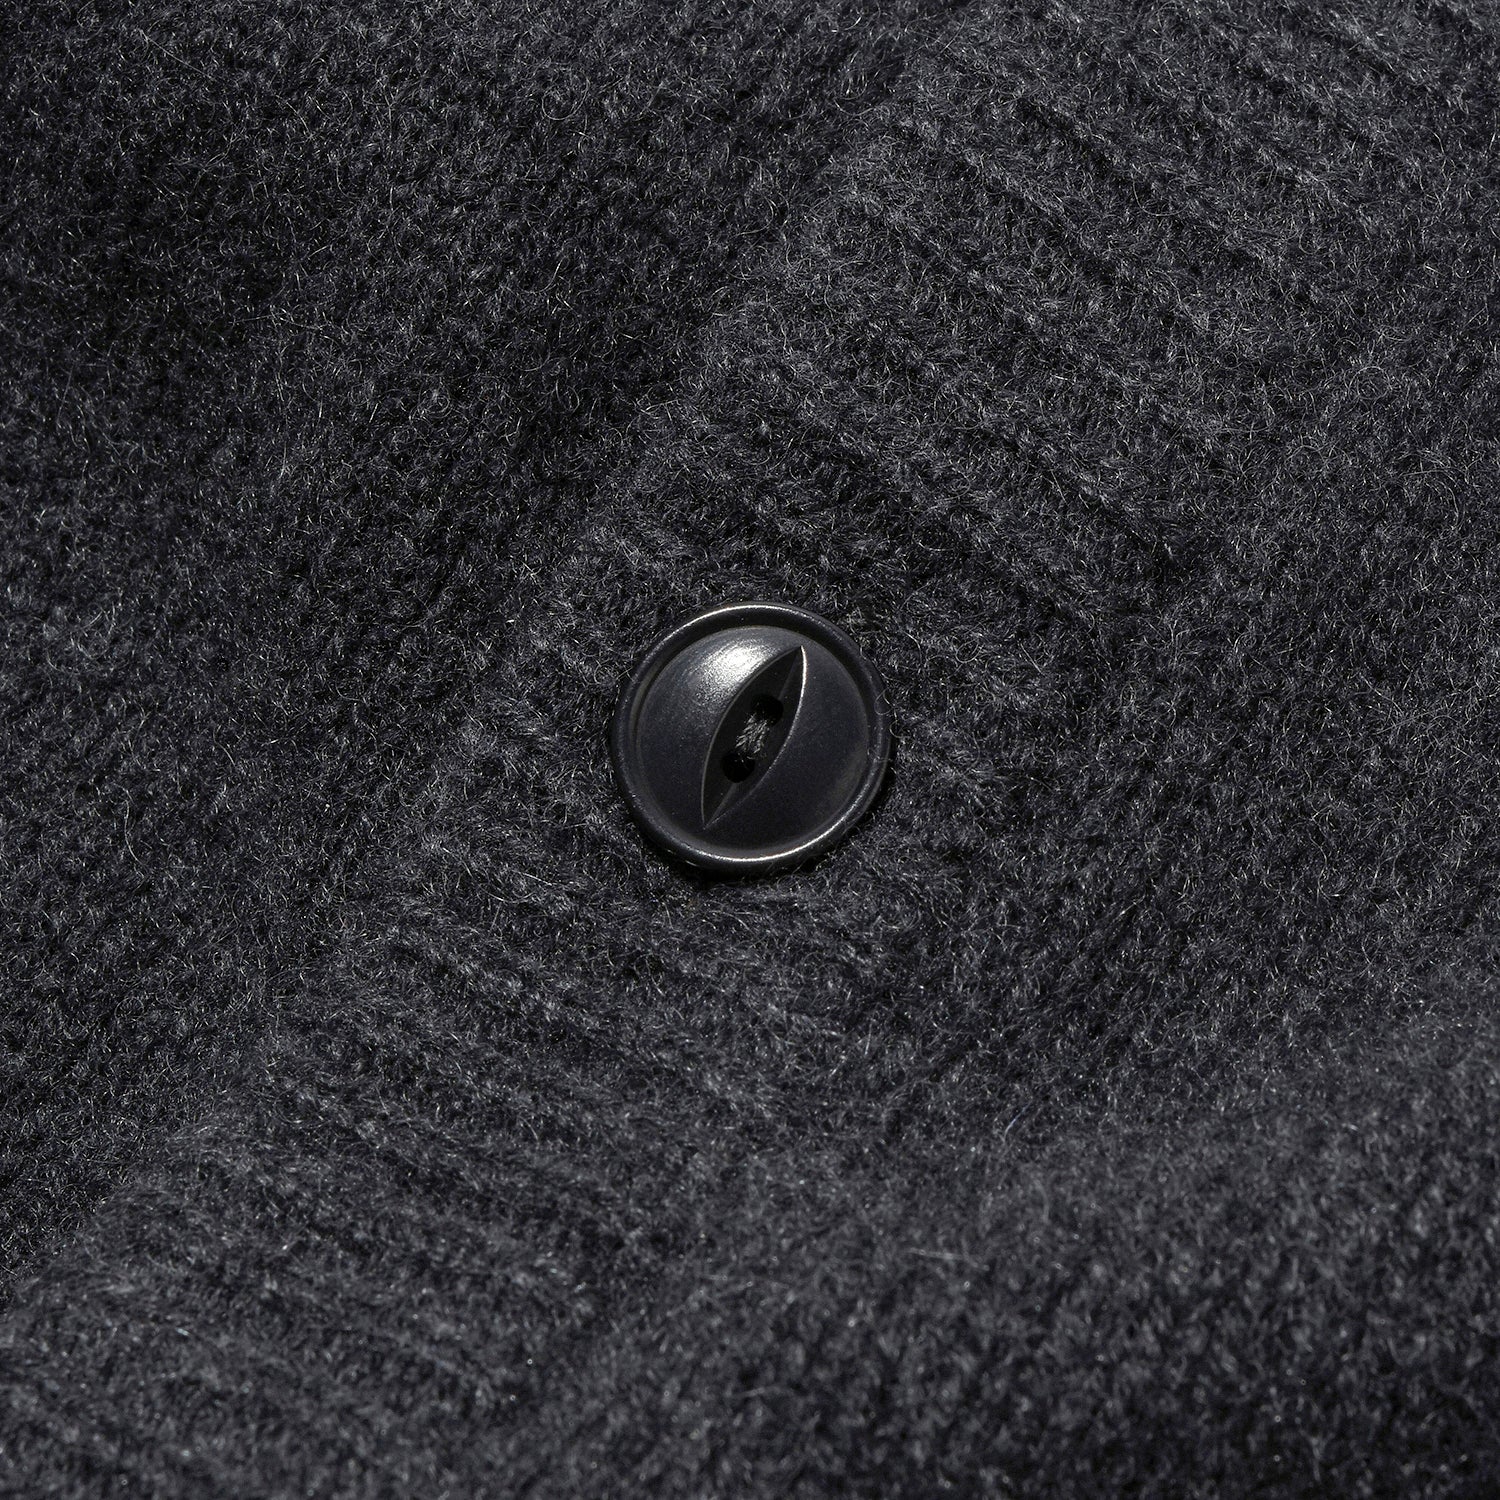 Charcoal Cashmere Cardigan